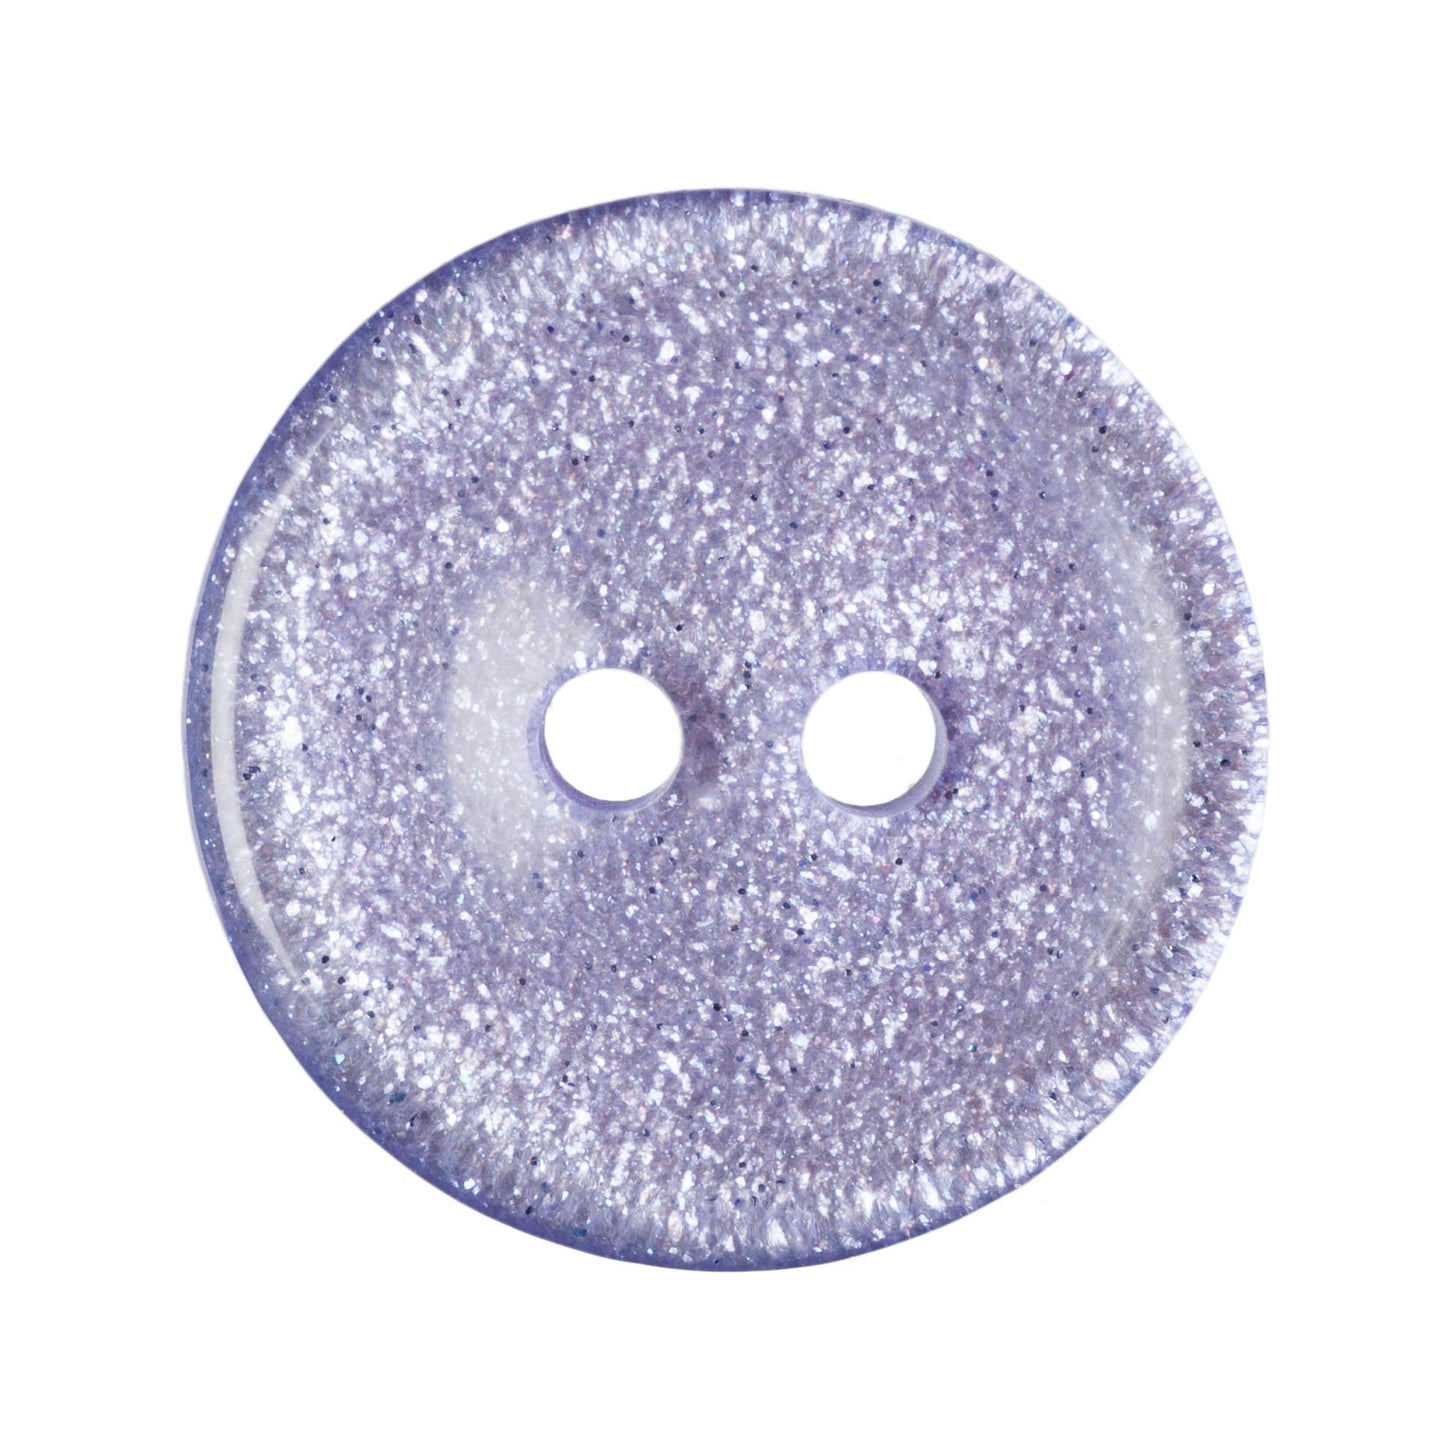 2 Hole Round Glitter Button - 15mm - Lilac [LD11.4]